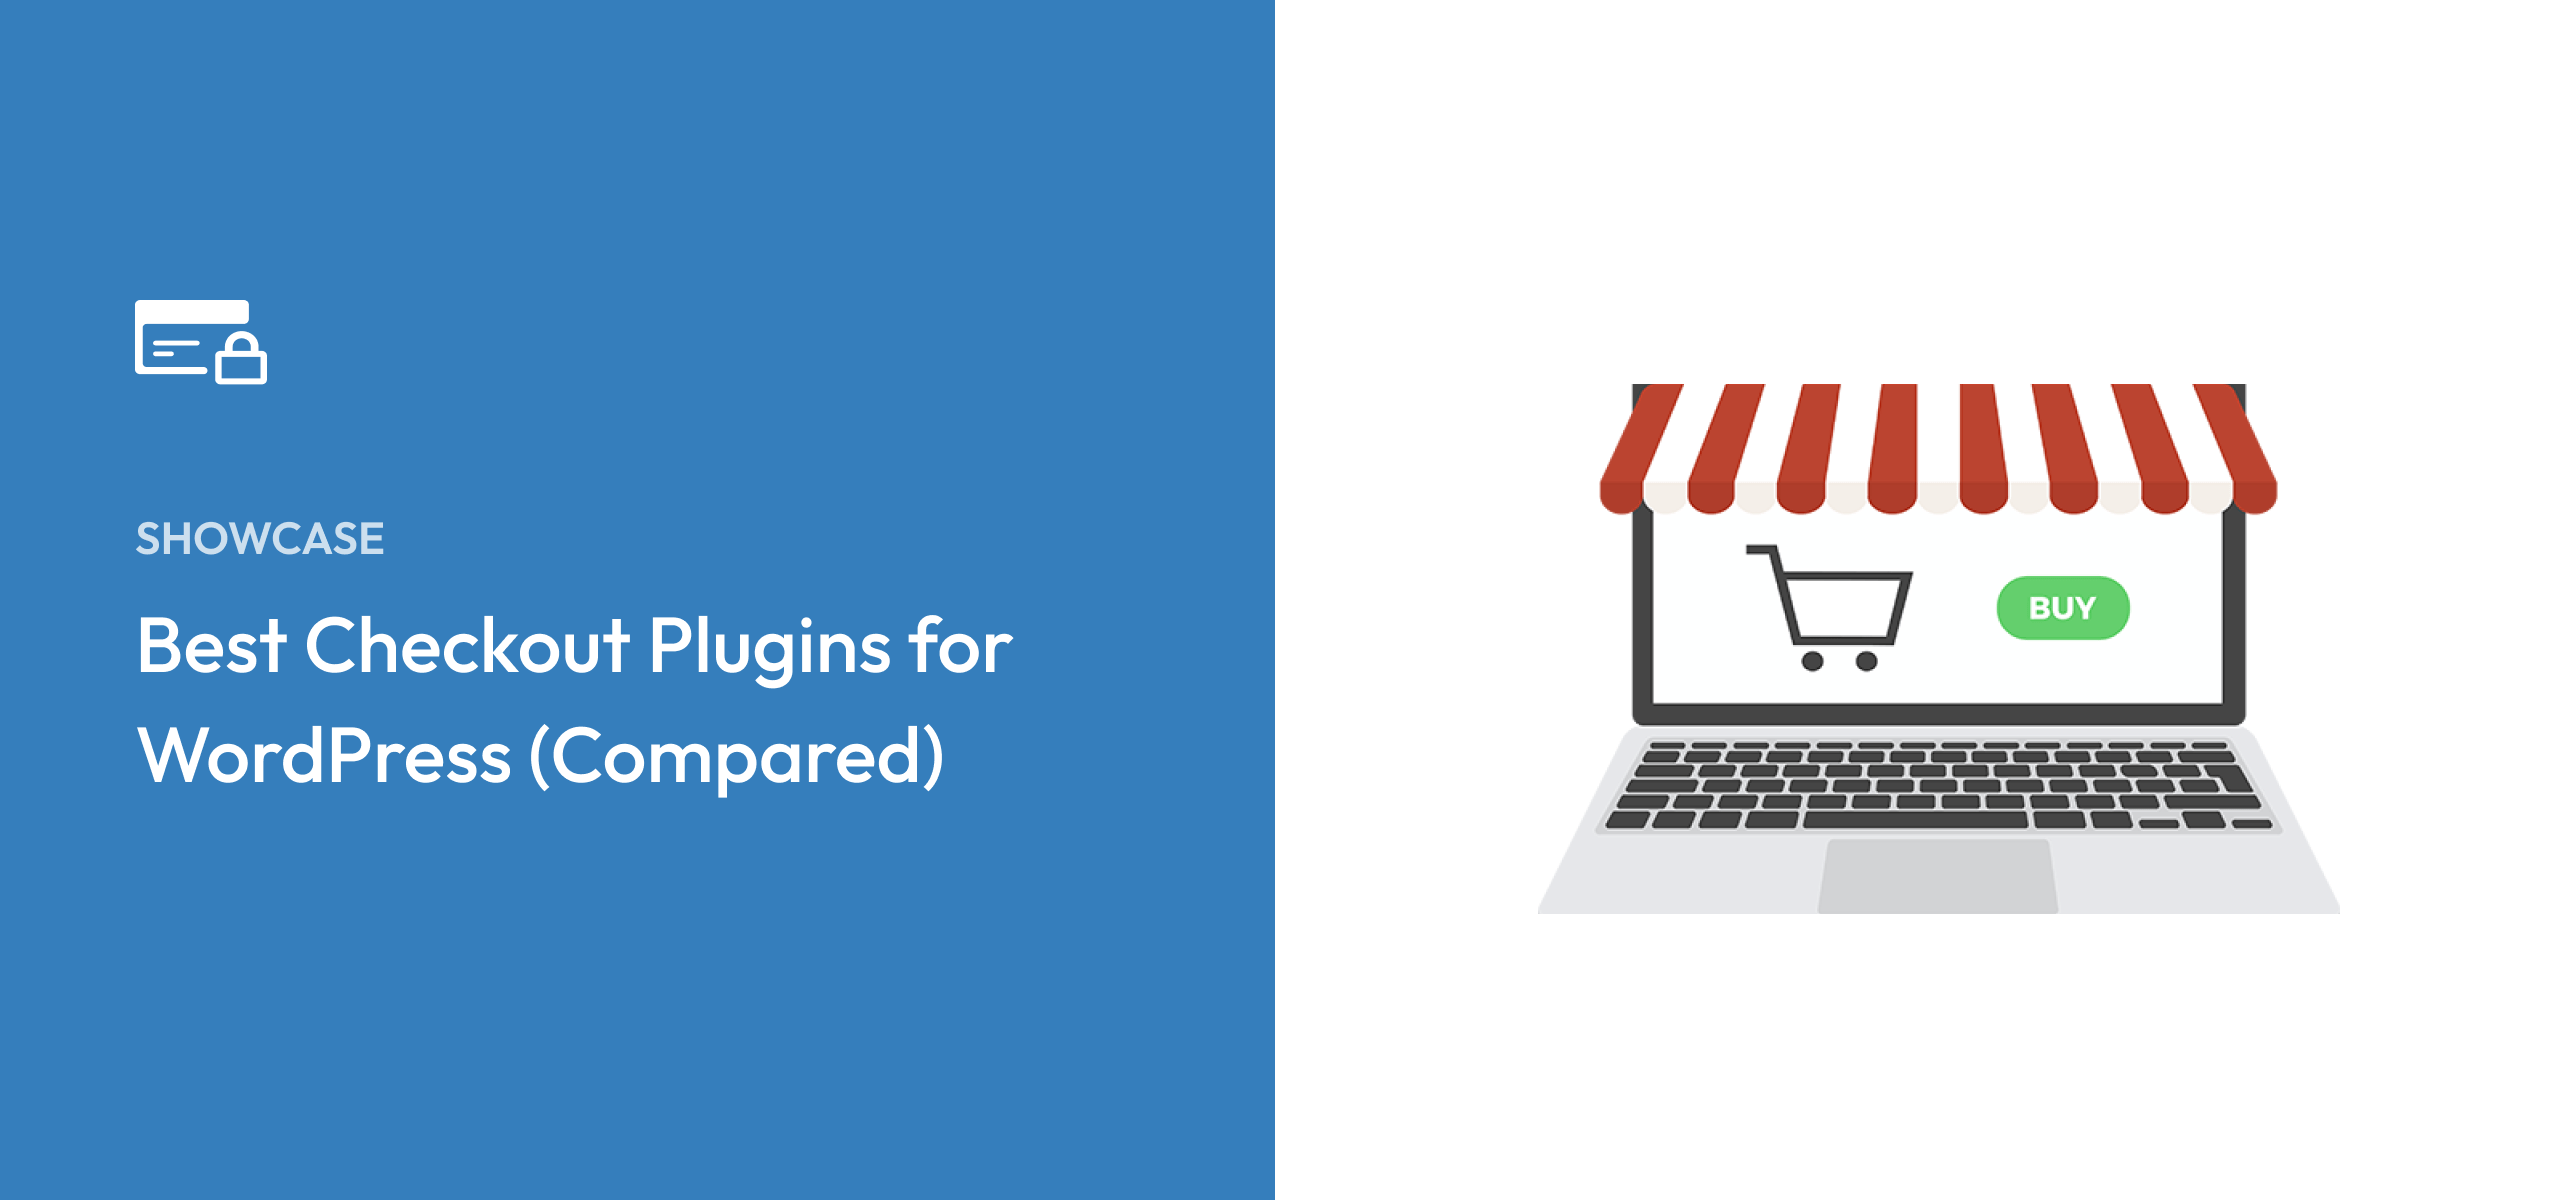 6 Best Checkout Plugins for WordPress (Compared)